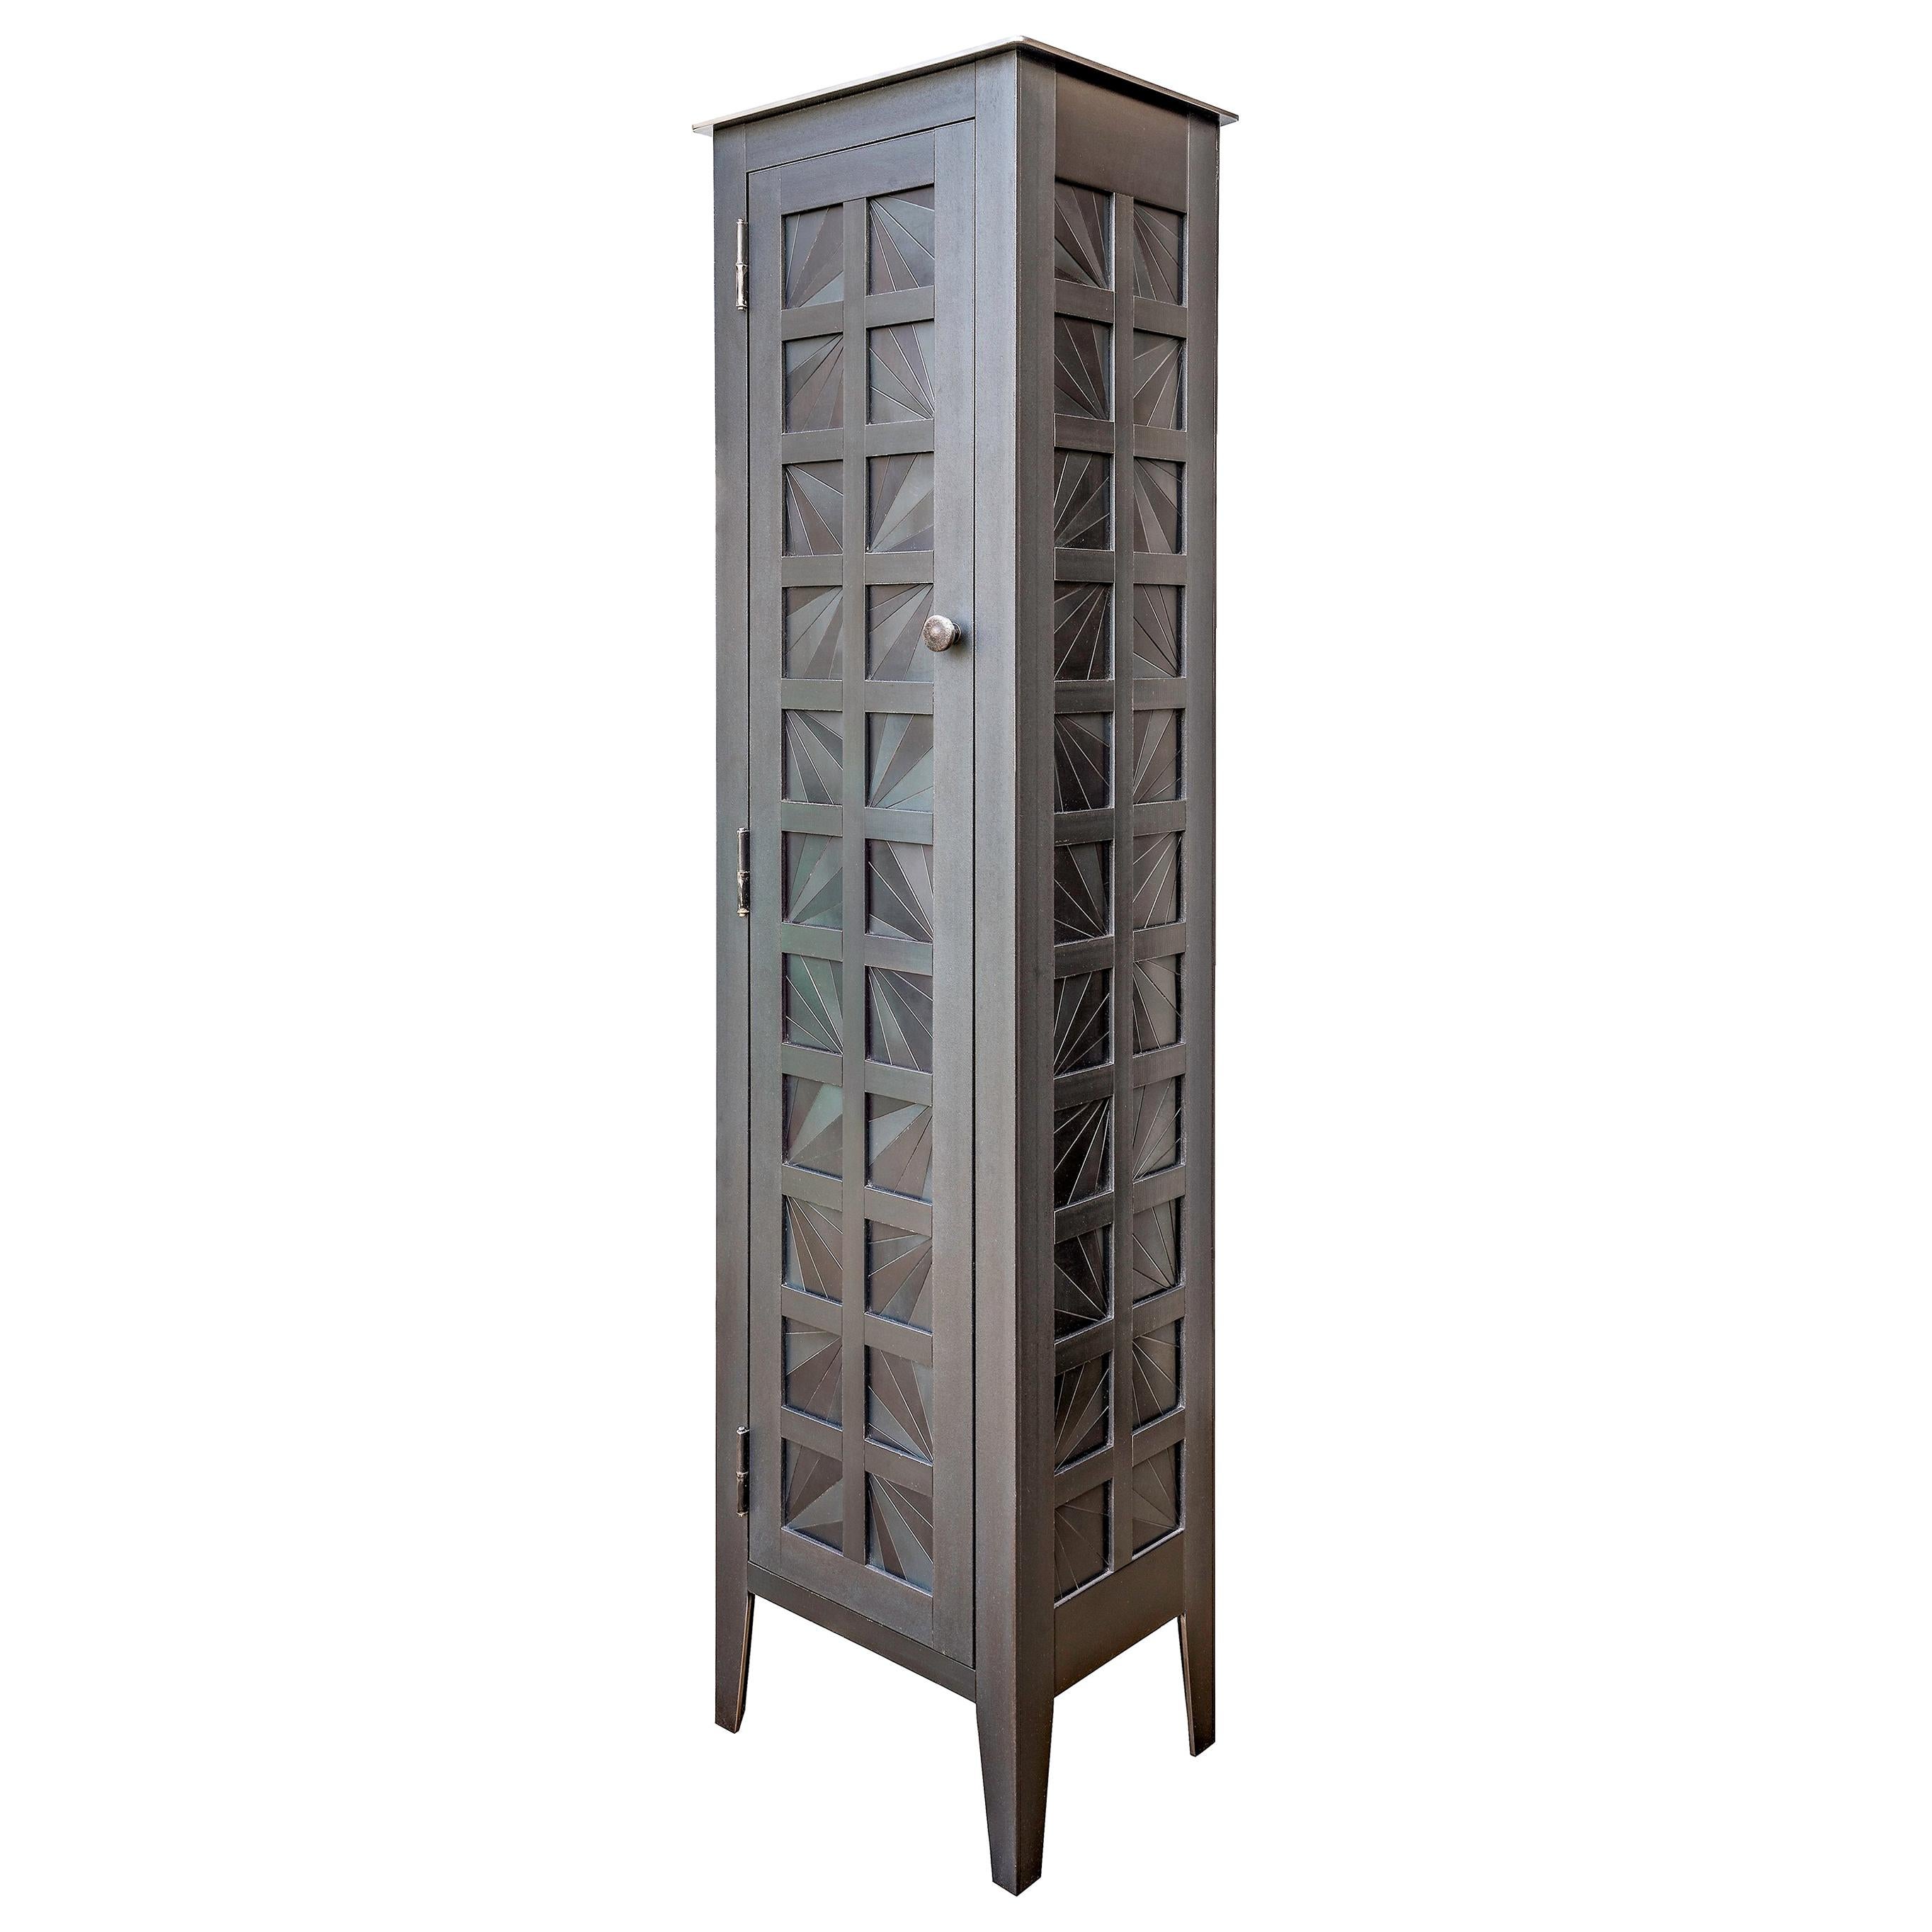 Jim Rose - Original Tall One Door "Fans" Quilt Cupboard, Monochromatic Pattern For Sale